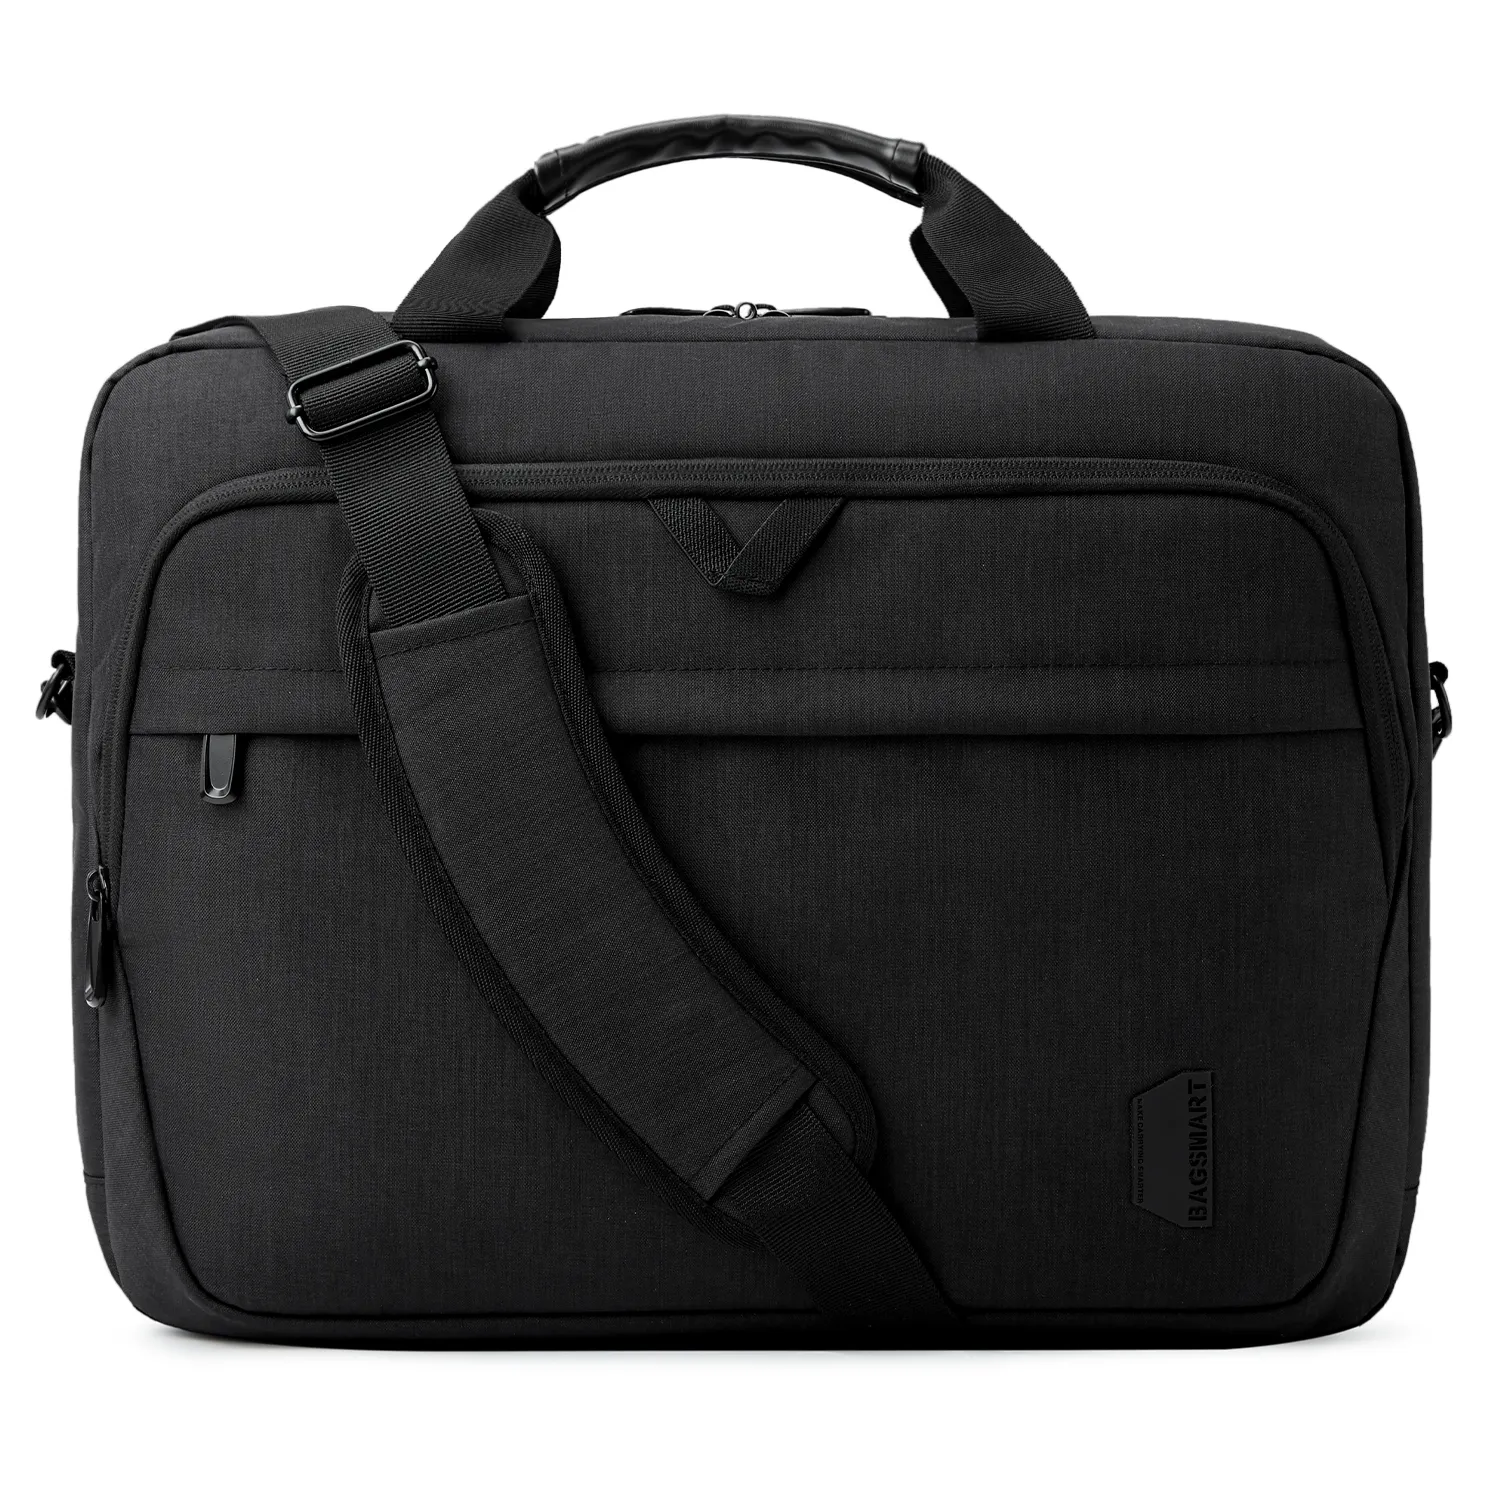 Briefcase With Shoulder Strap: Spacious 17.3-inch Laptop Bag by BAGSMART - Waterproof, Antitheft, and Expandable